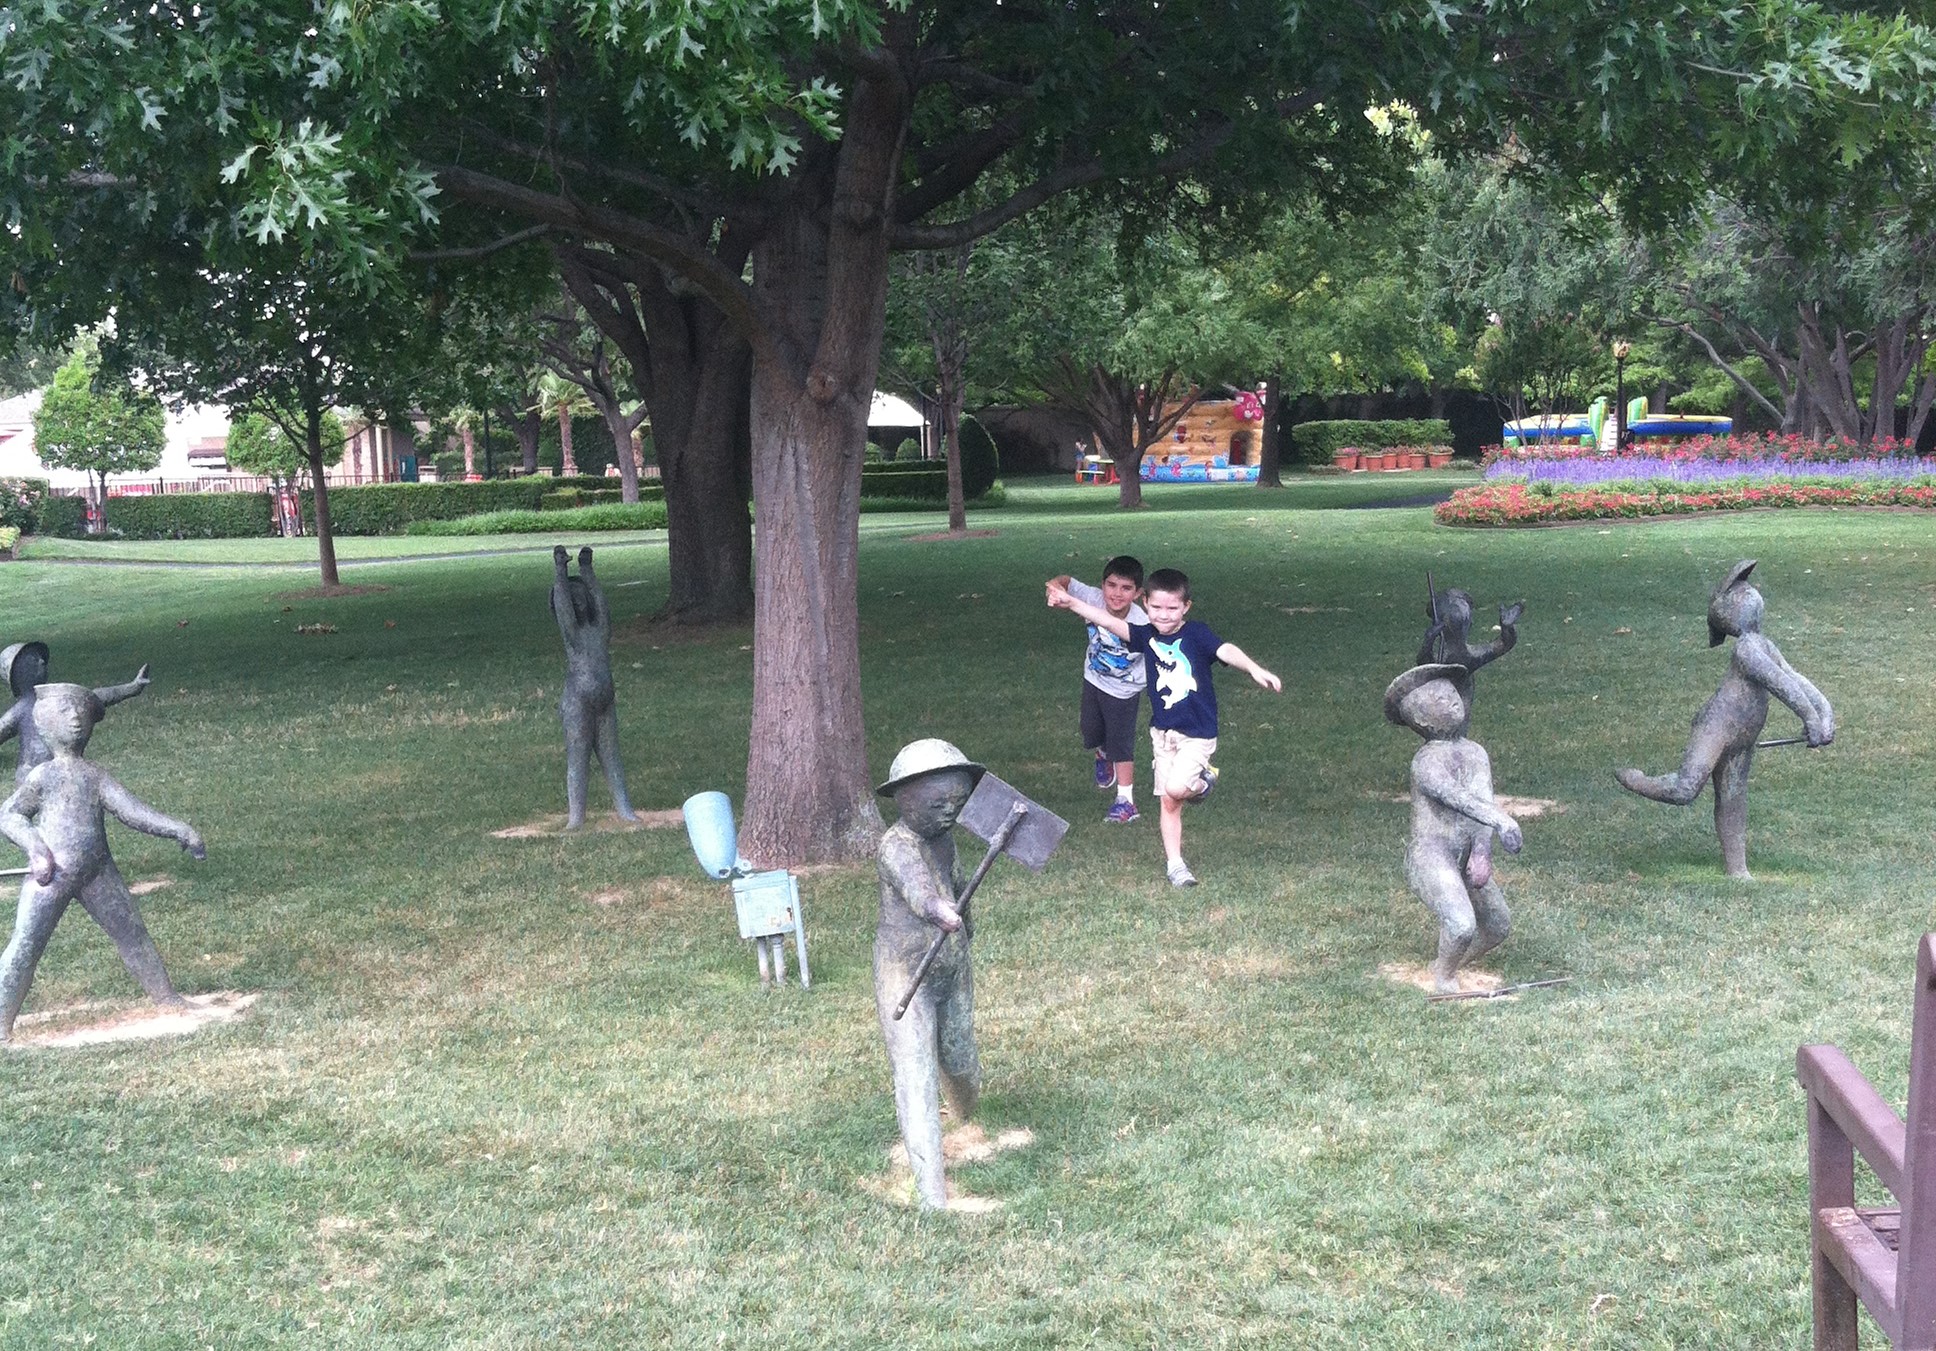 Playtime by Texas artist David Cargill- According to the audio there are 8 bronze figures of children playing but I only counted 7.  We didn't see the 8th.